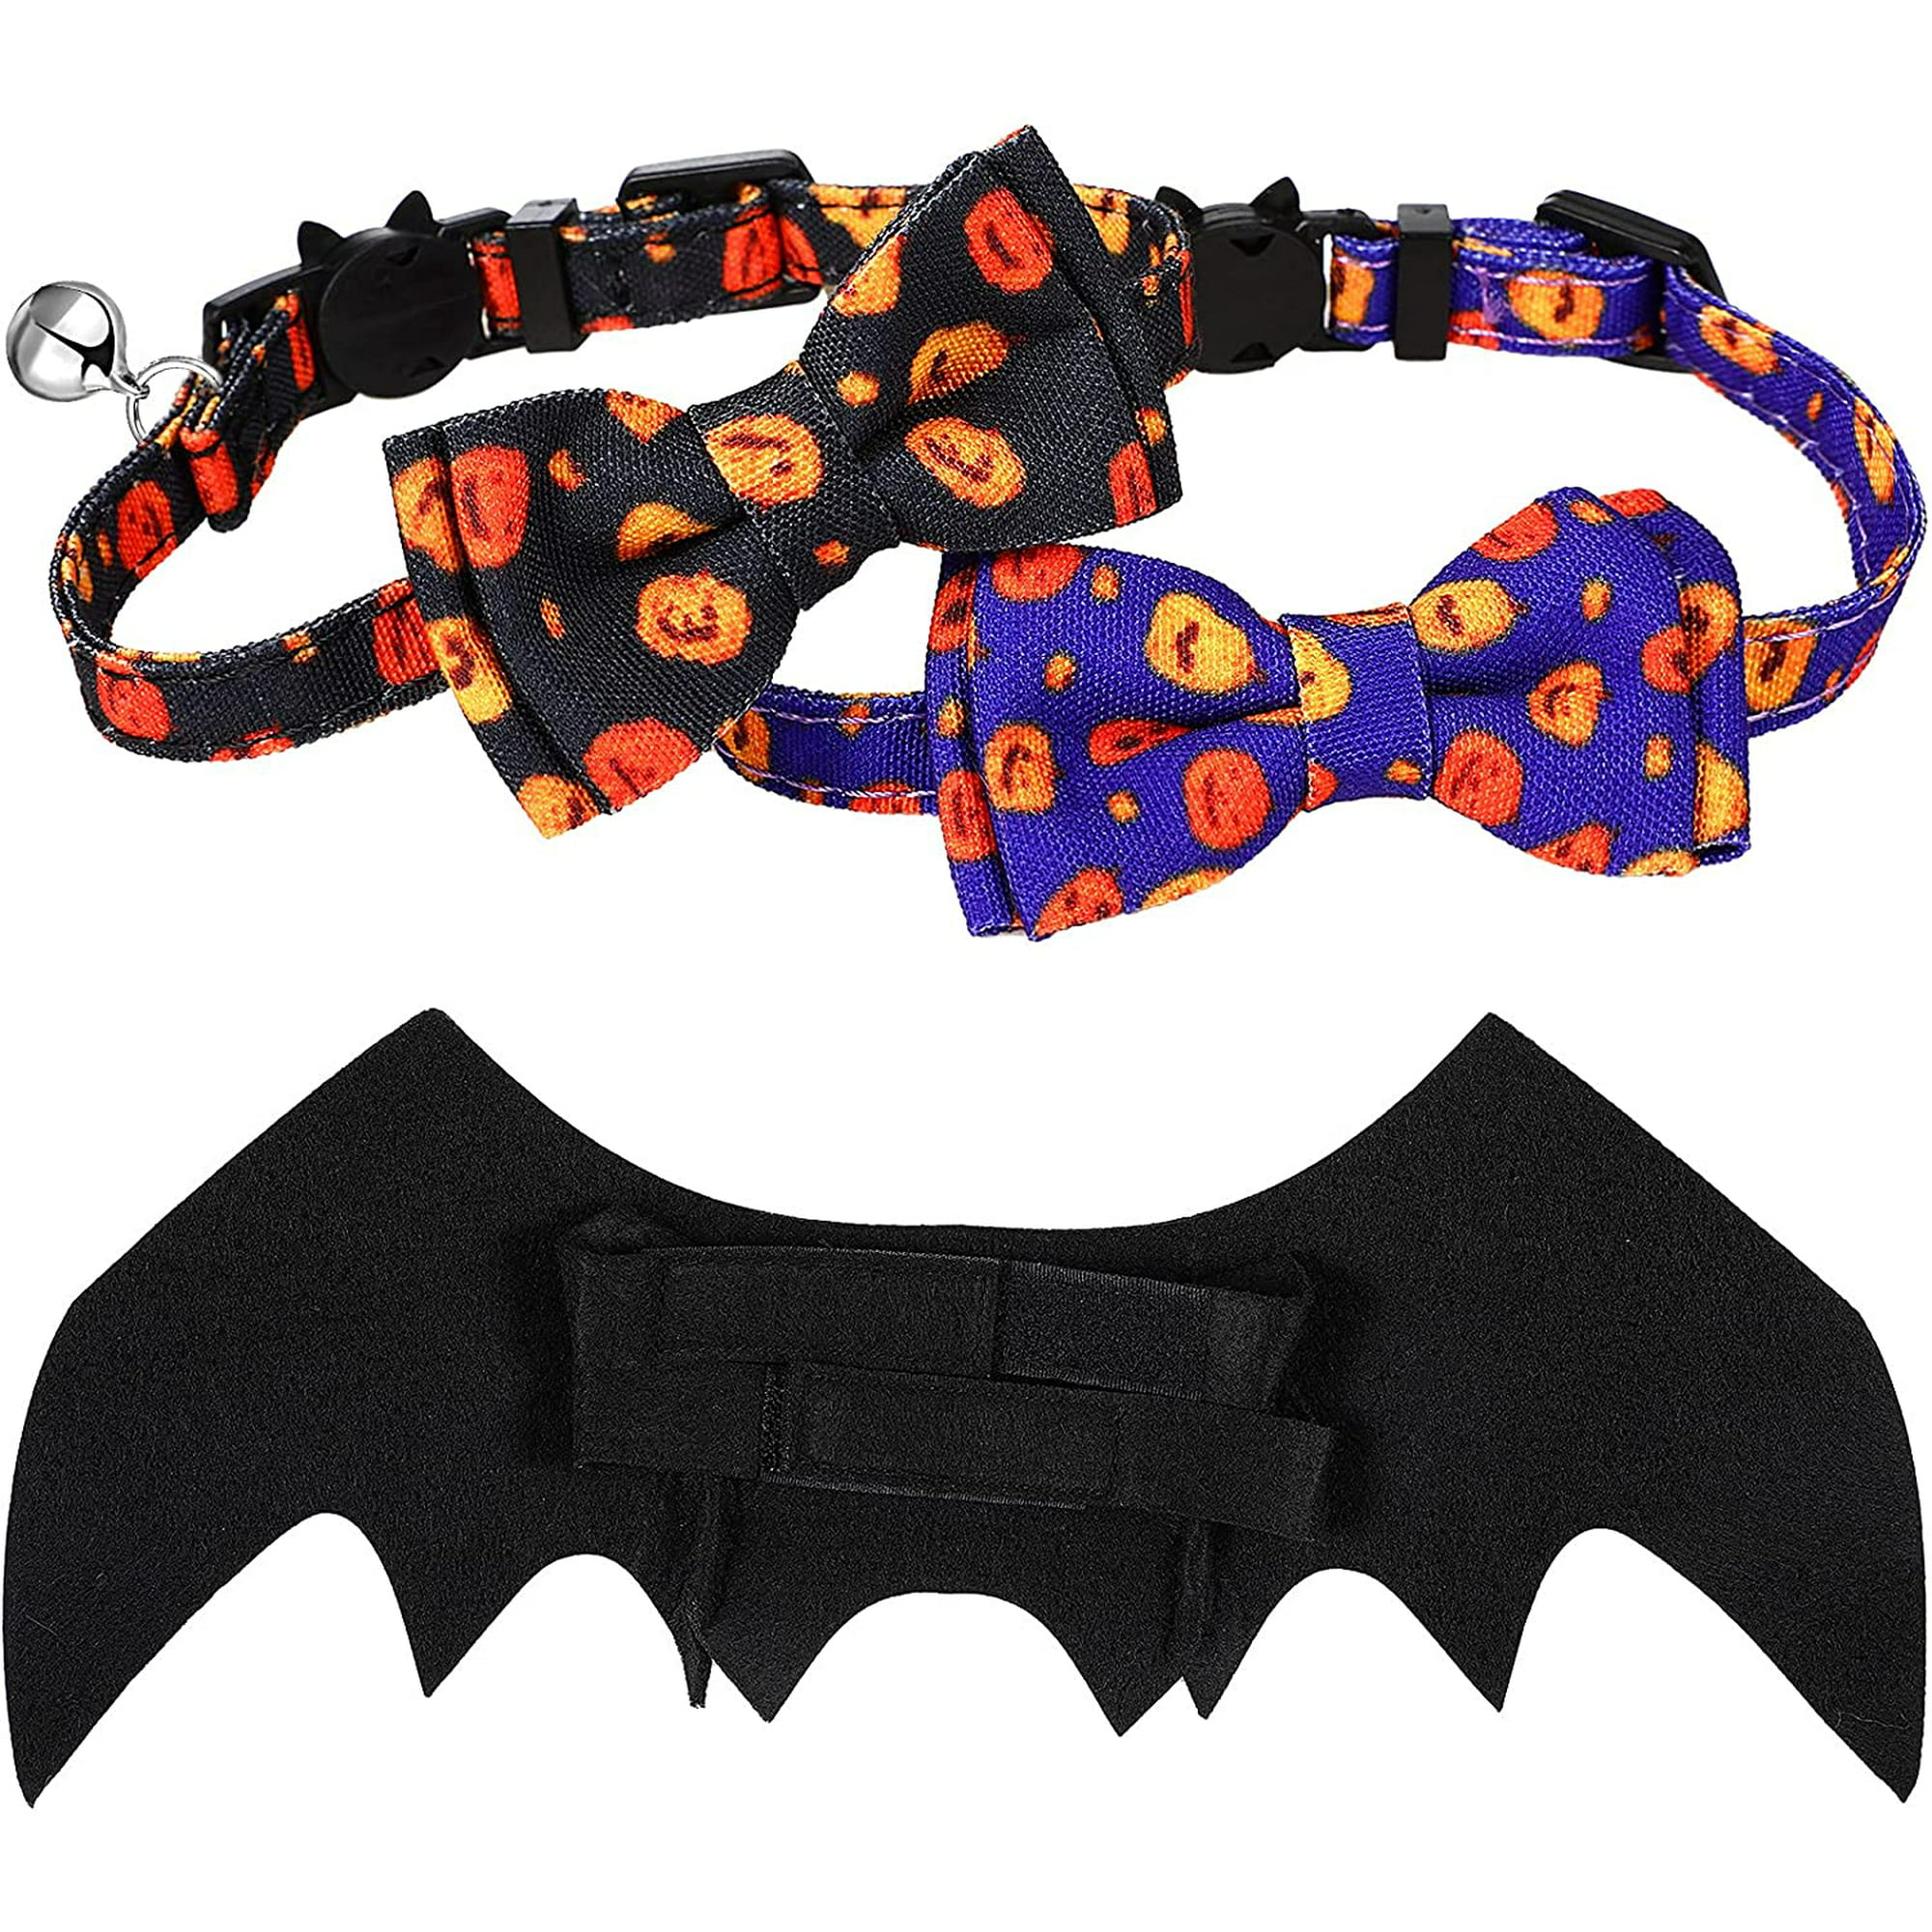 New Style Halloween Pet Puppy Dog Cat Neck Ties Removable Adjustable Dog Bowties